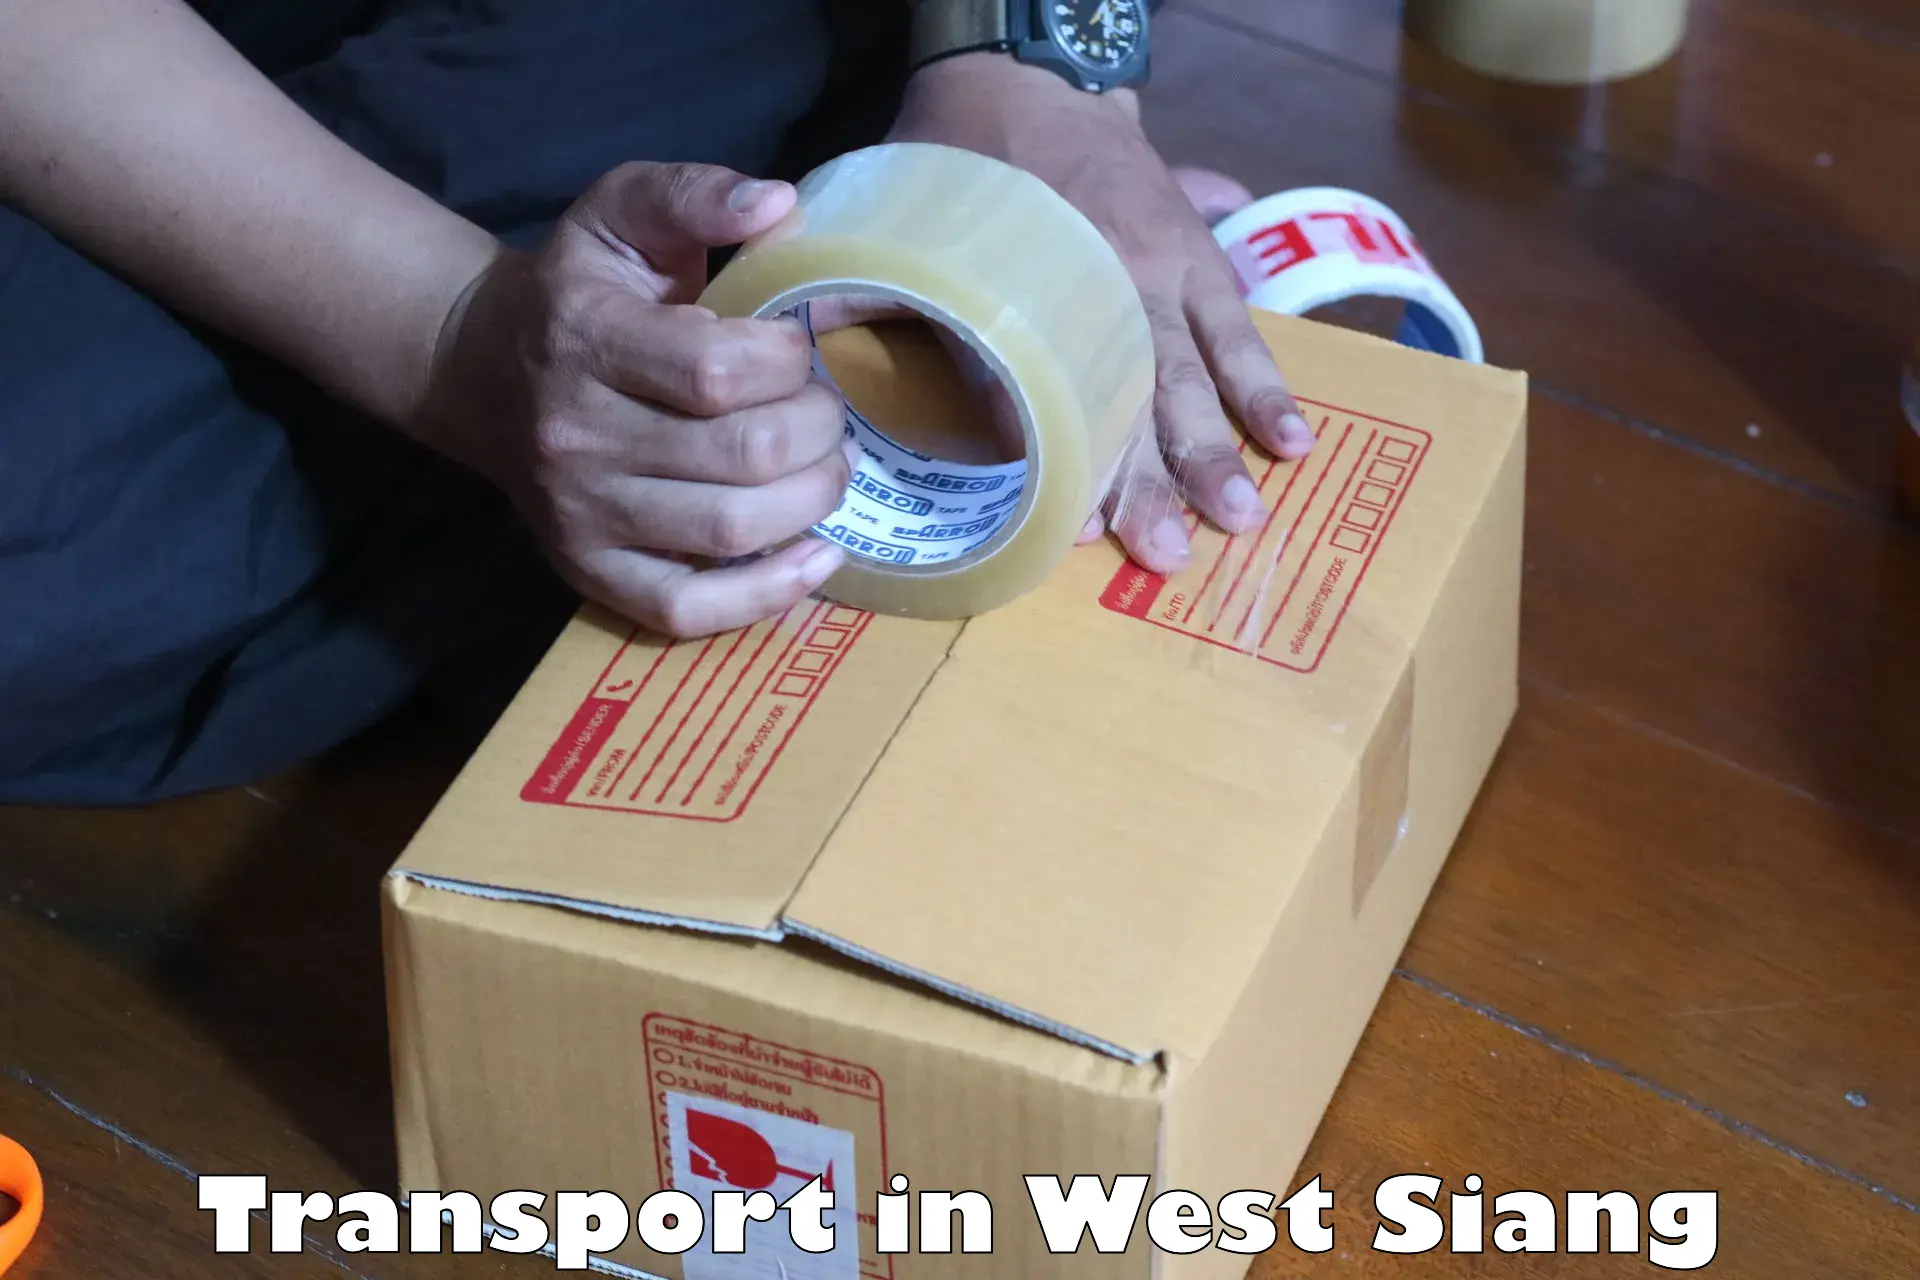 Cargo transport services in West Siang